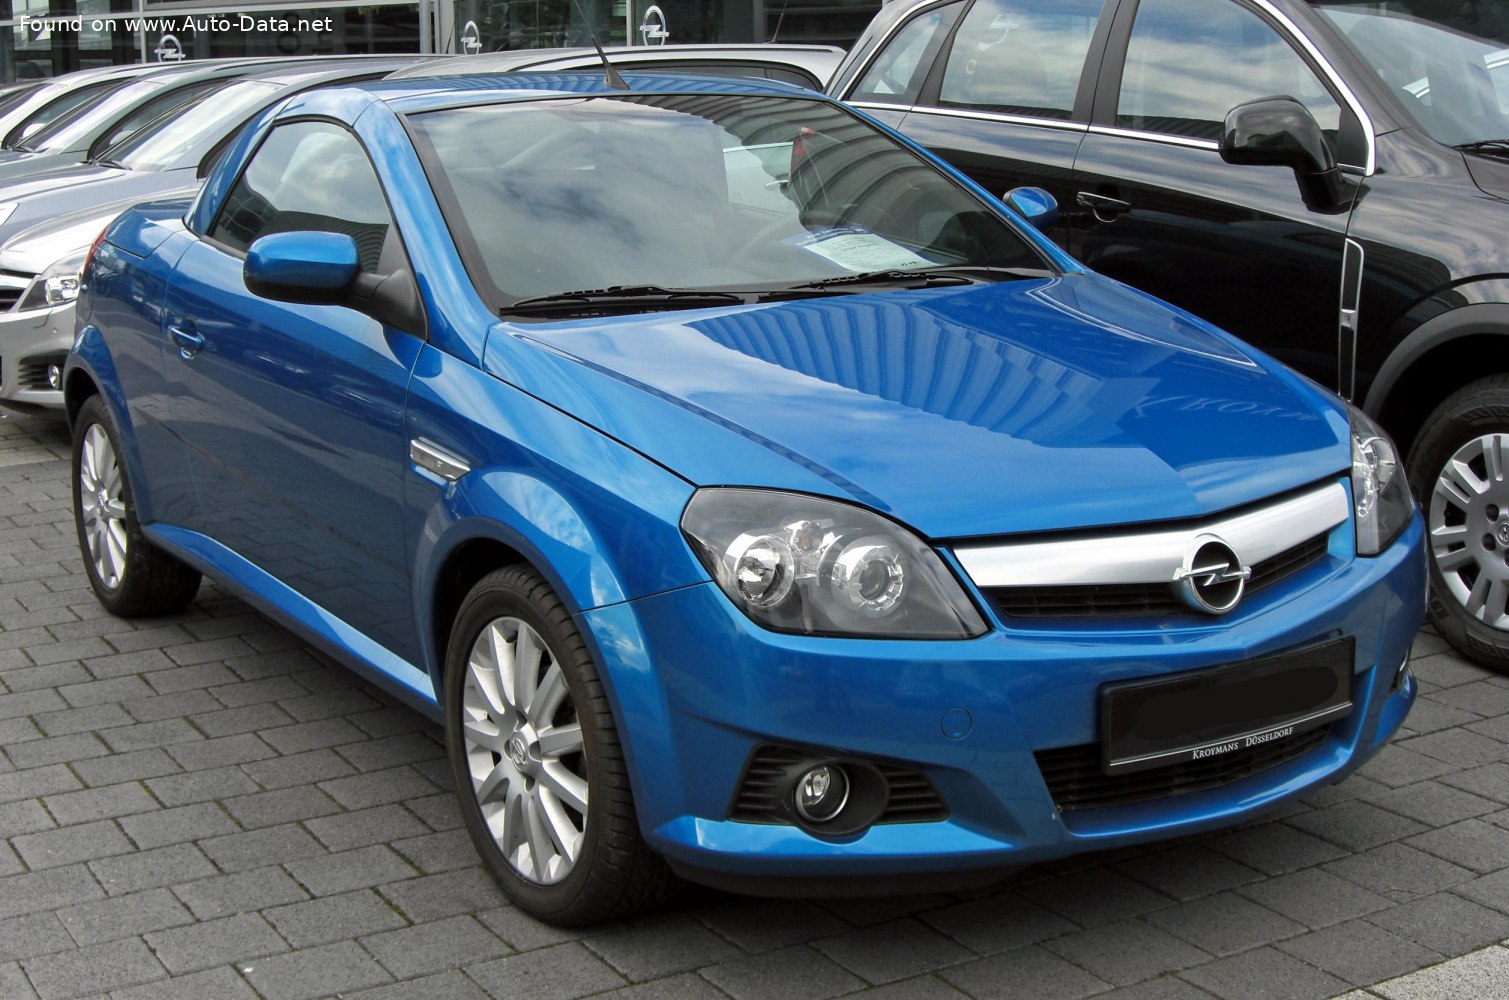 Opel - Tigra B TwinTop Wheels and Tyre Packages